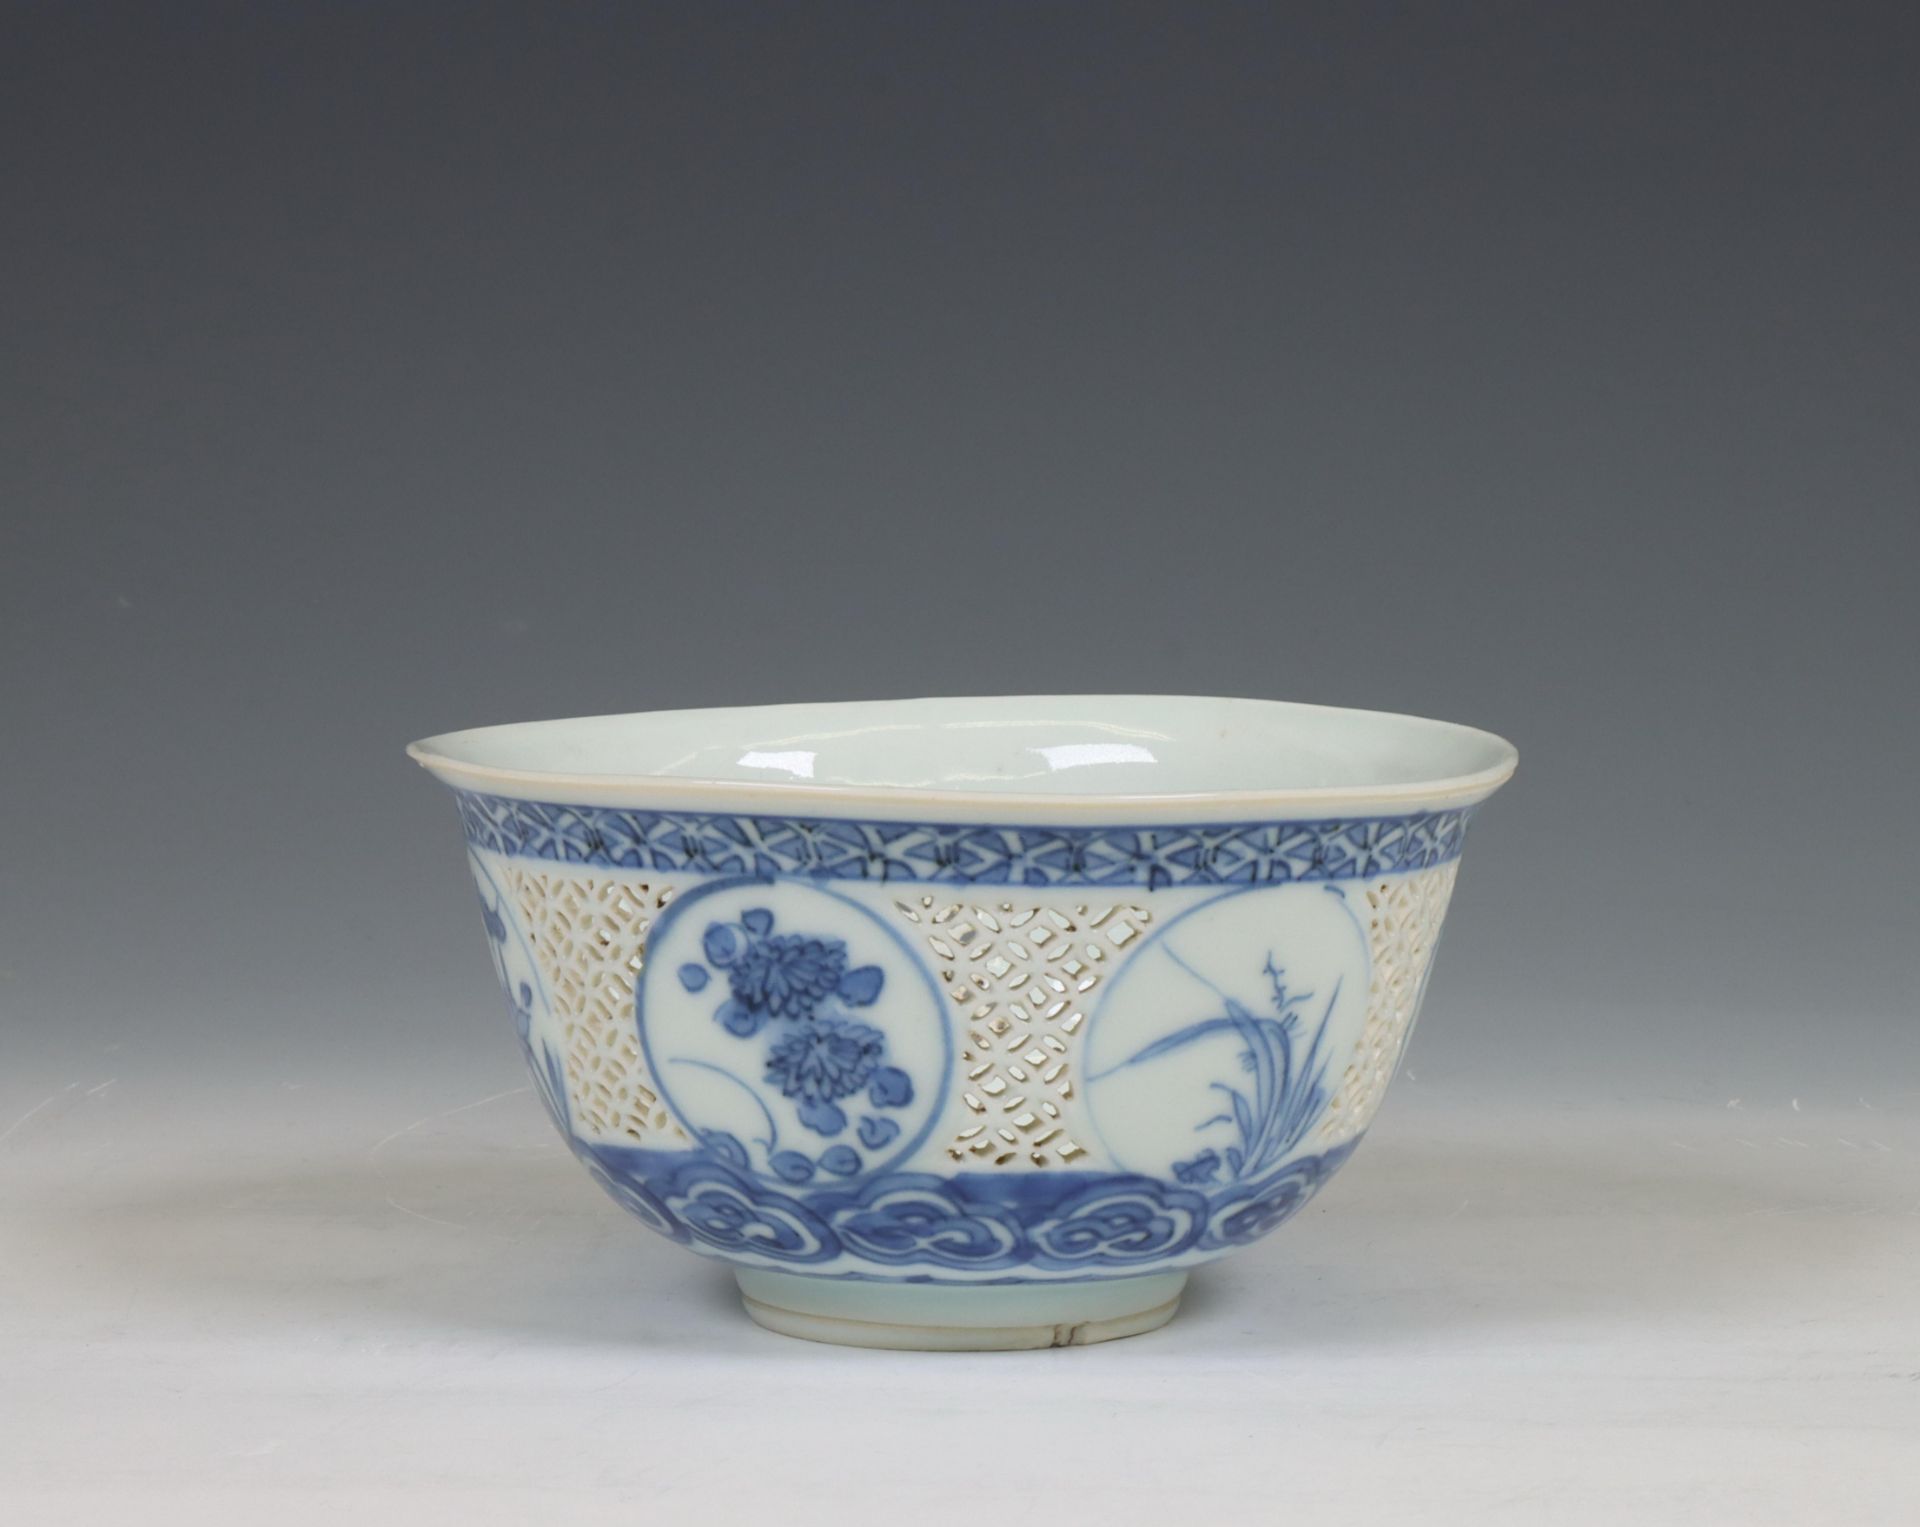 China, a blue and white porcelain openworked bowl, 18th century, - Image 6 of 6